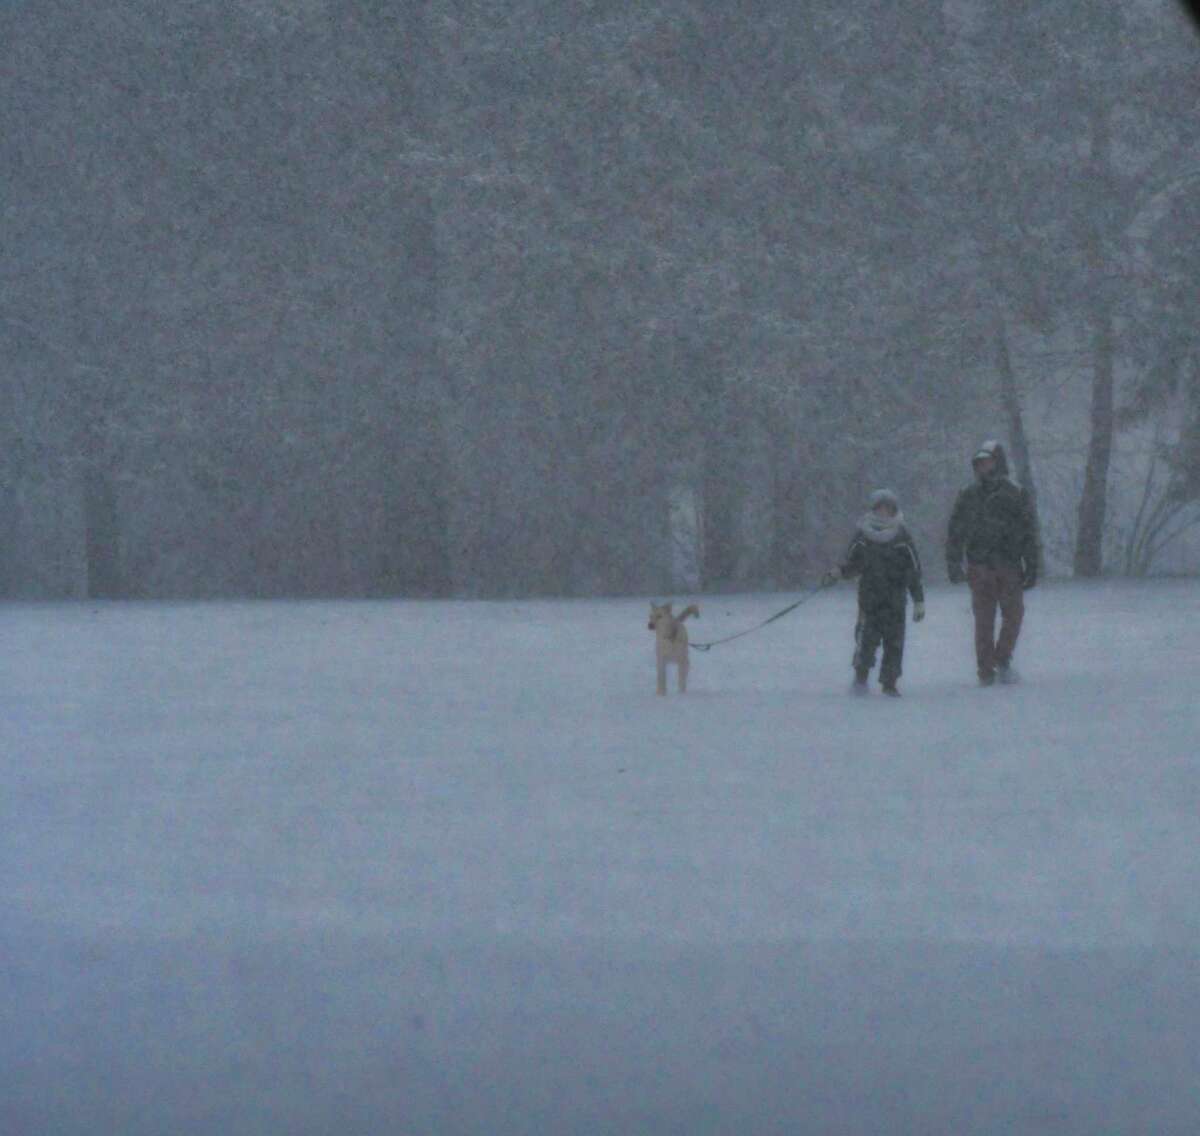 Two people and a dog make their way through the snow in Washington Park on Sunday, Dec. 1, 2019, in Albany, N.Y. (Paul Buckowski/Times Union)